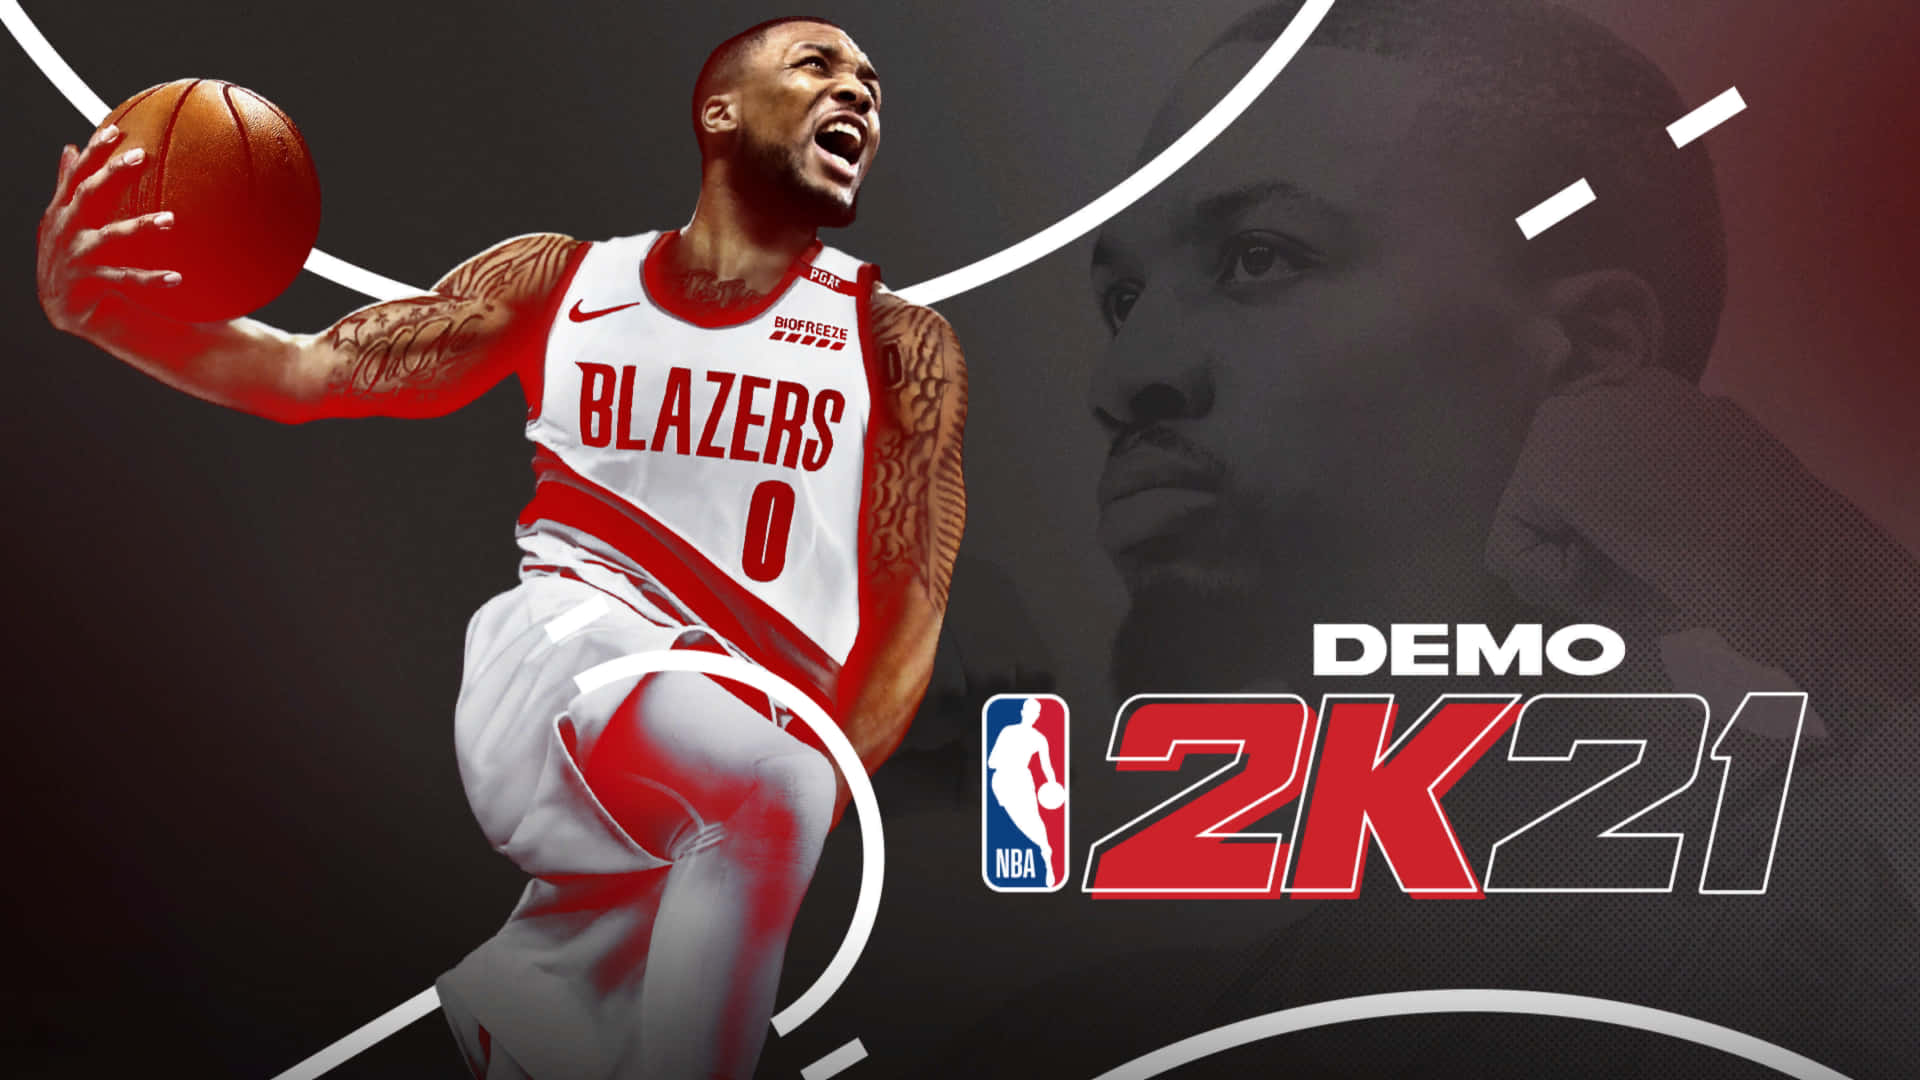 "Go all out with the newest edition of NBA 2K21" Wallpaper